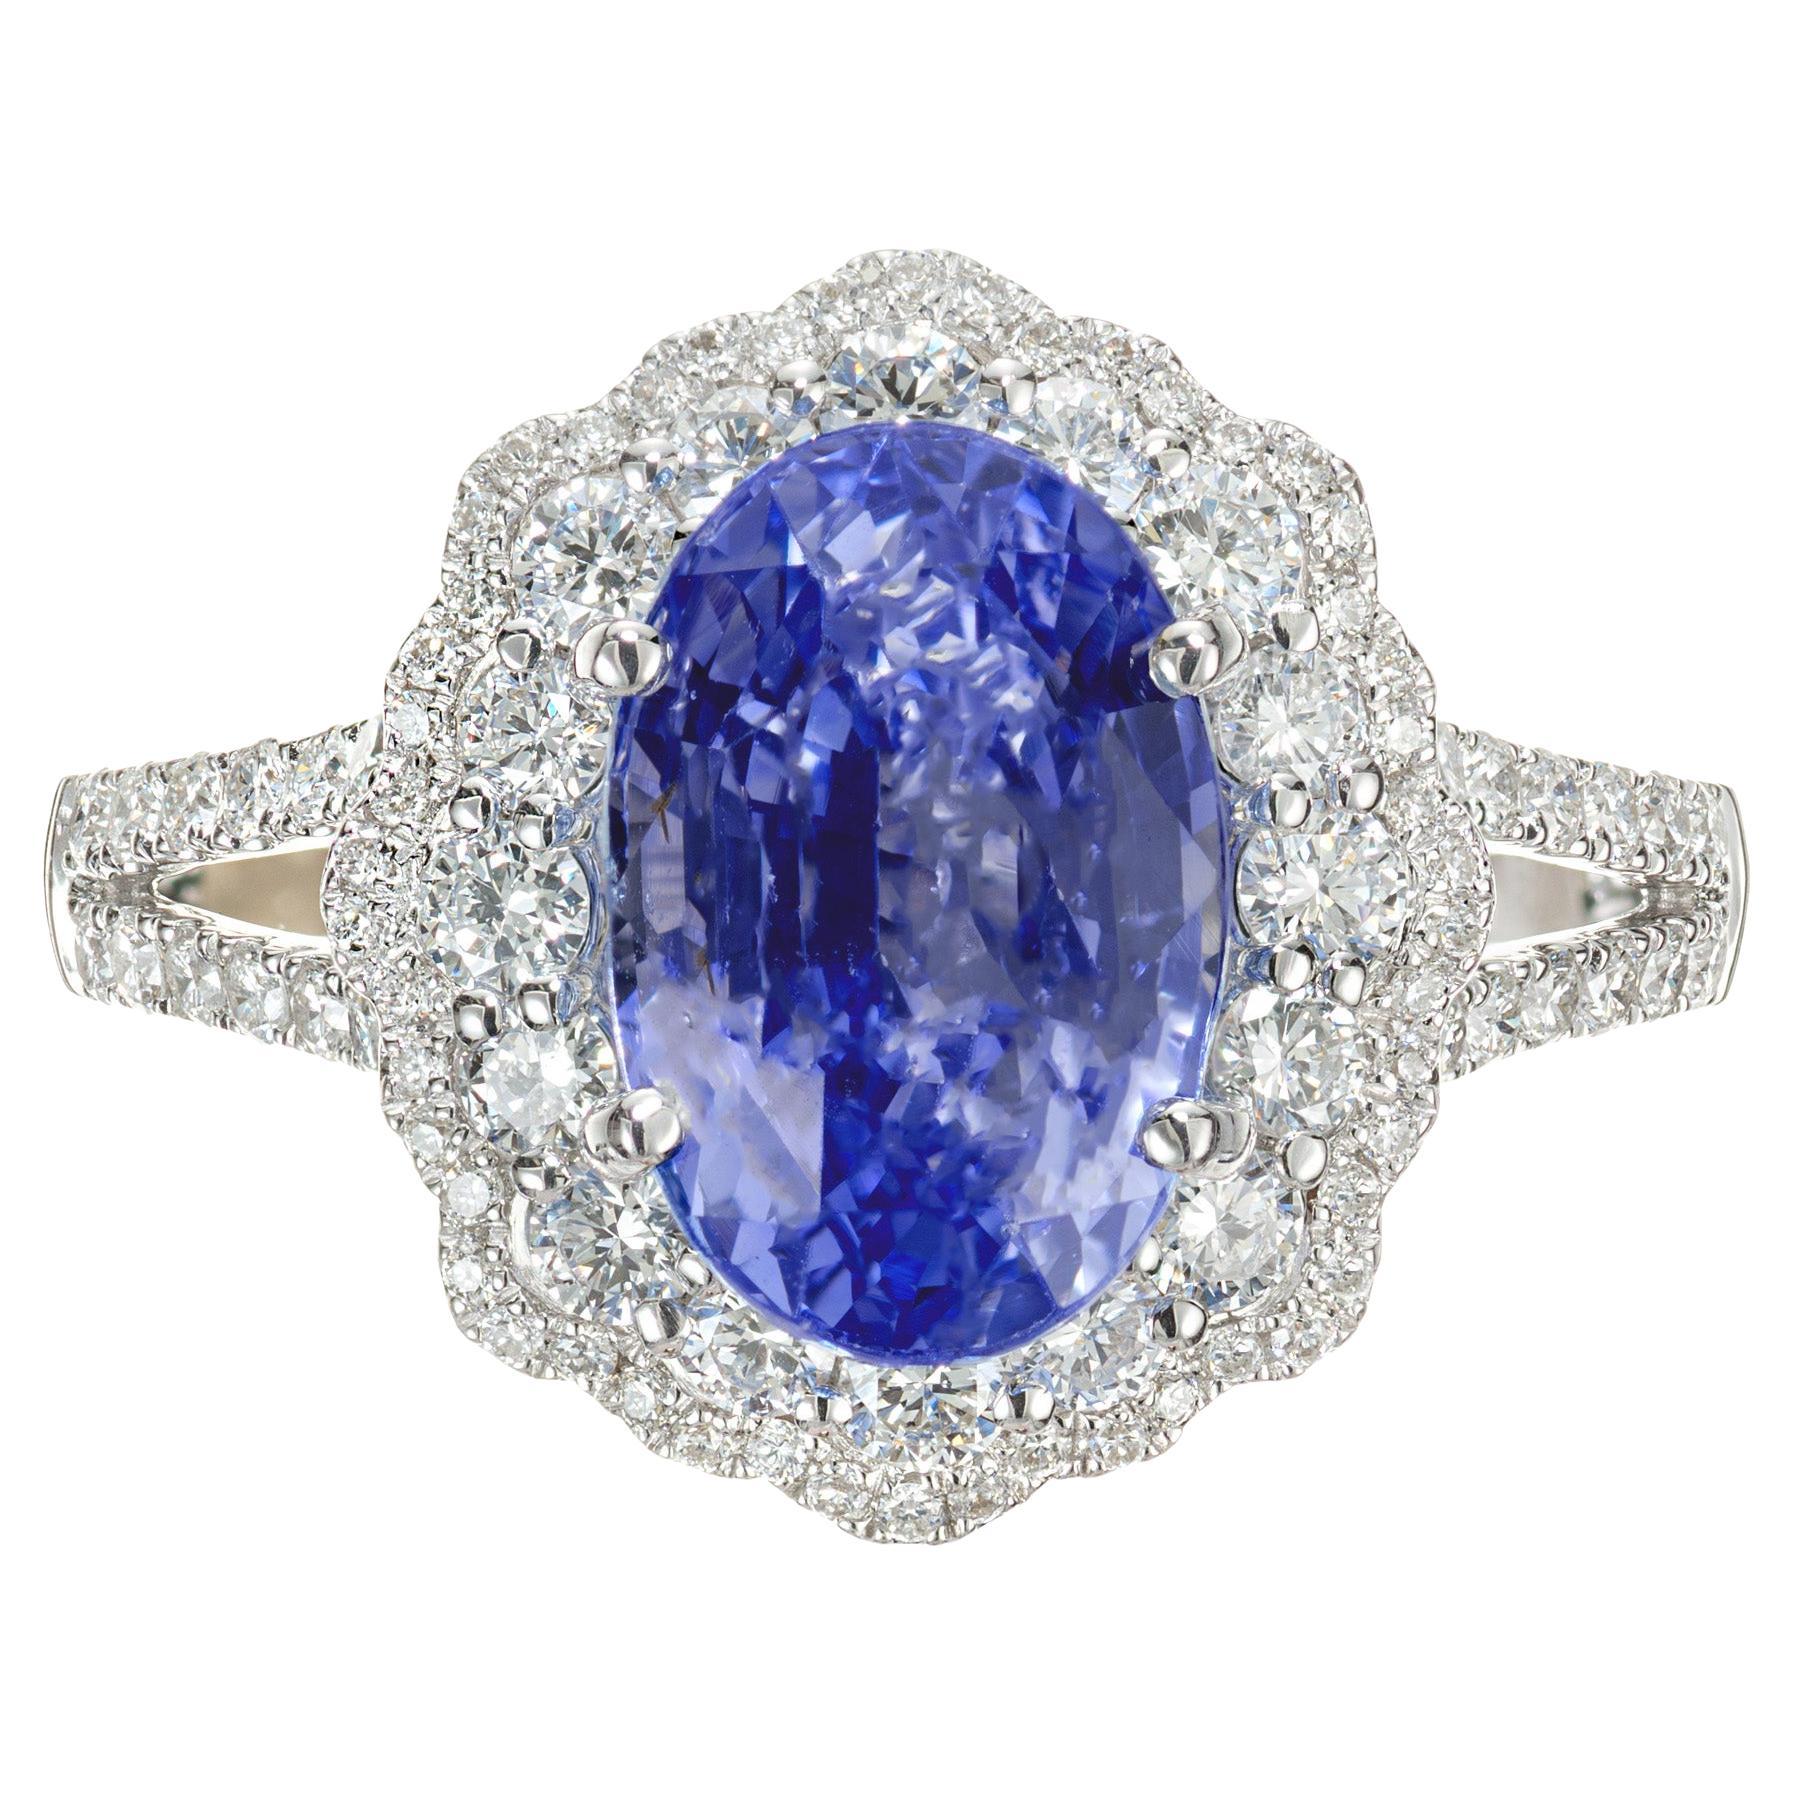 Peter Suchy GIA 4.55 Carat Oval Sapphire Diamond Halo Gold Engagement Ring 